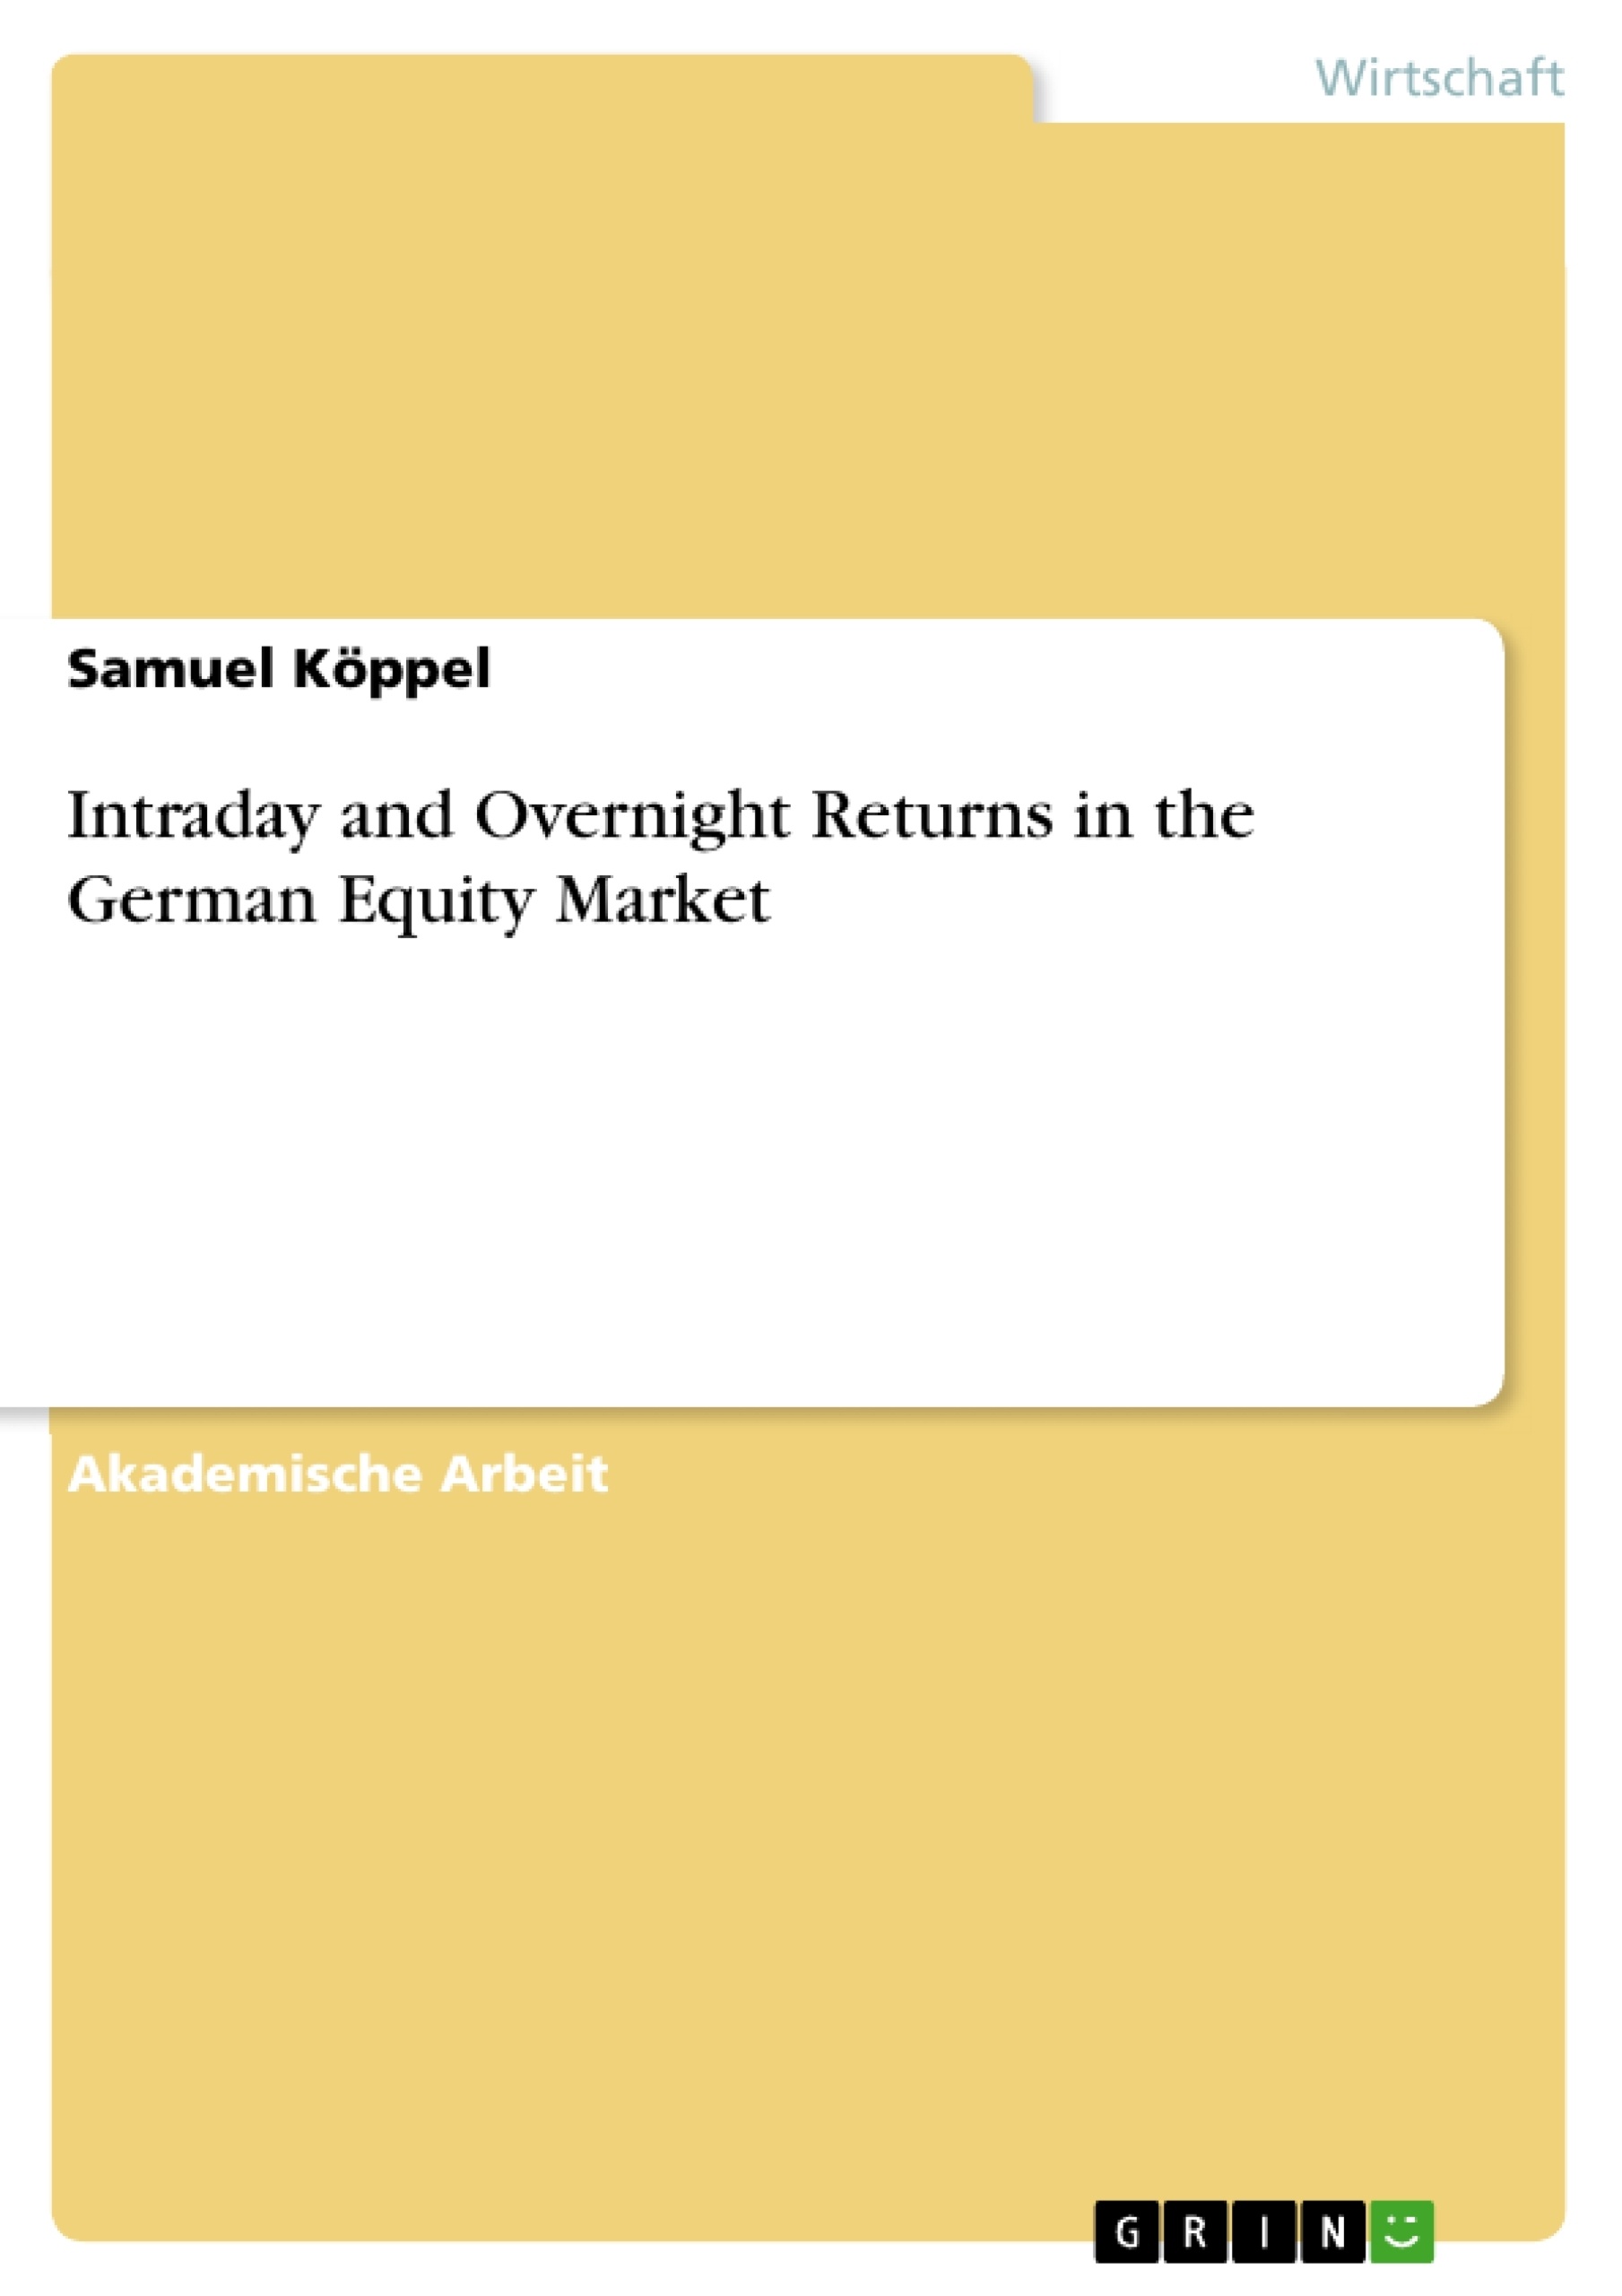 Titel: Intraday and Overnight Returns in the German Equity Market